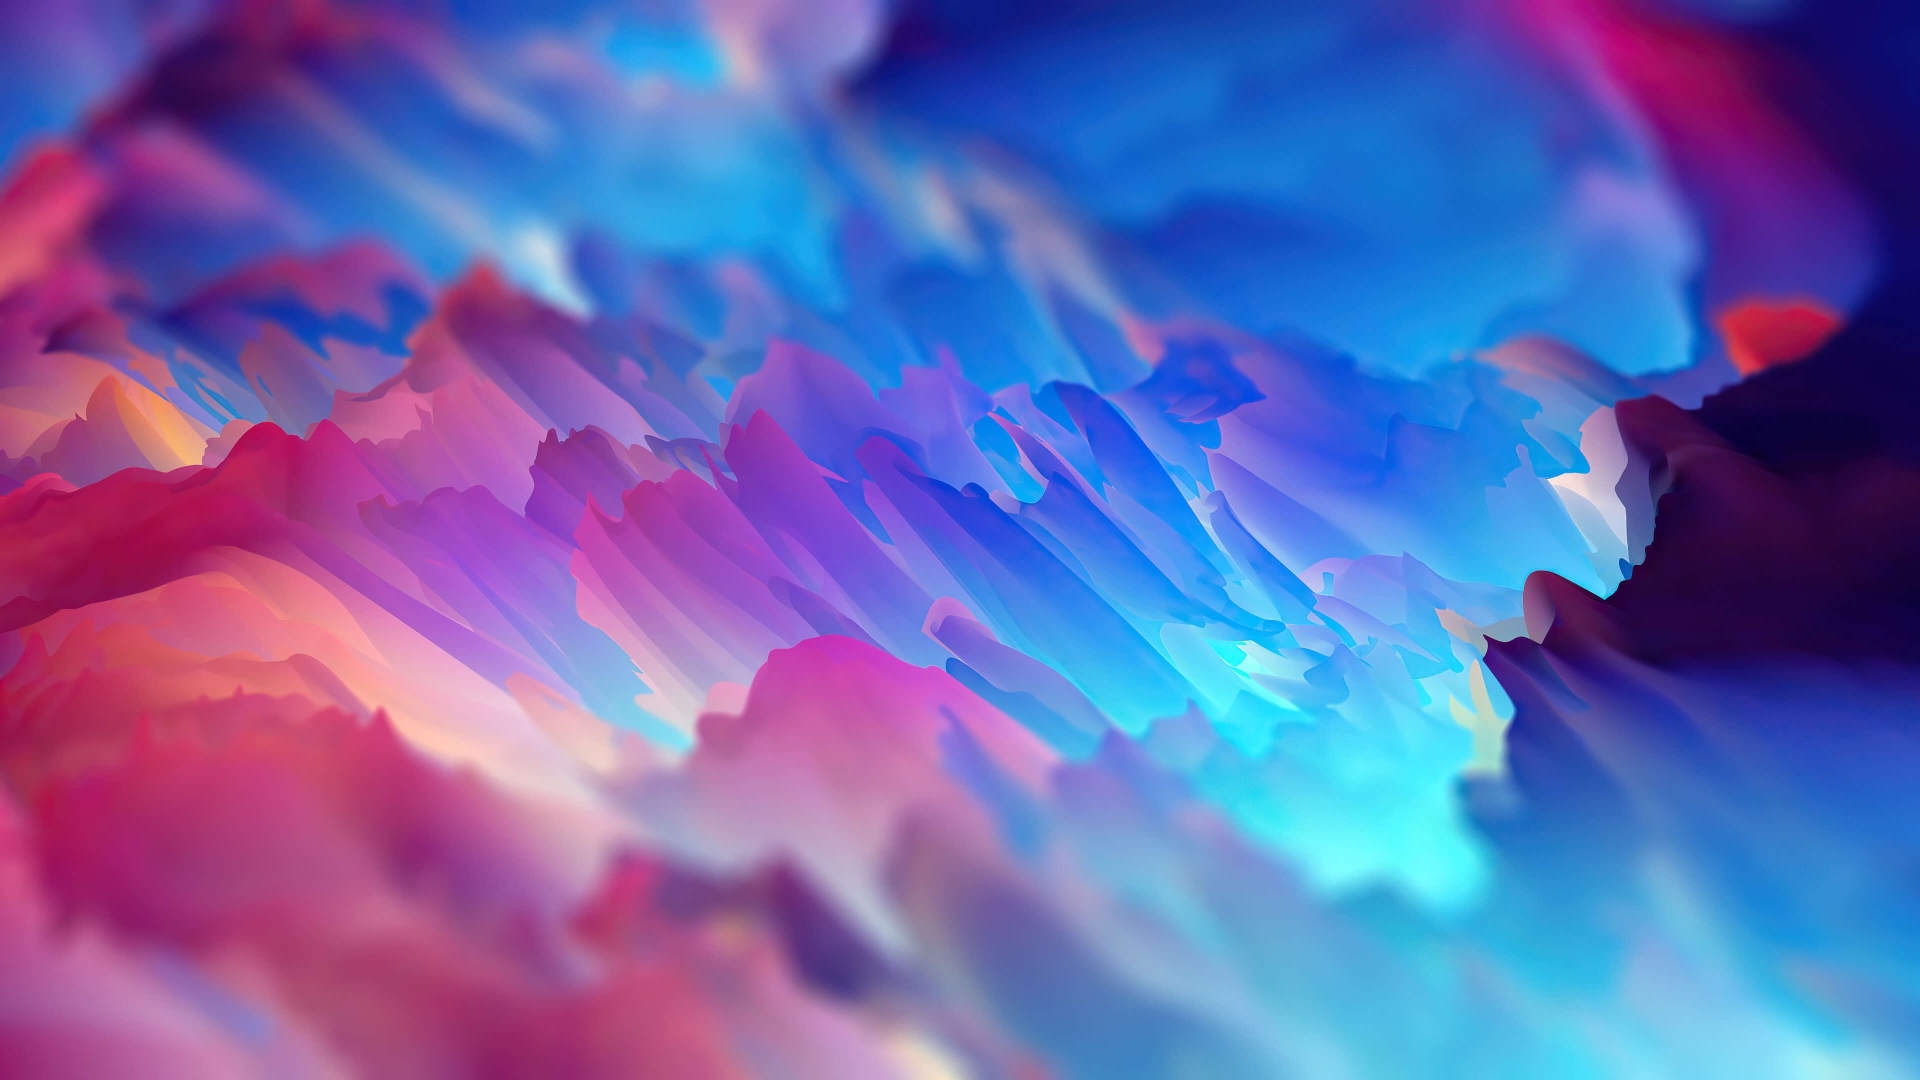 1920x1080 Resolution Abstract Rey of Colors 4k 1080P Laptop Full HD Wallpaper - Wallpapers Den